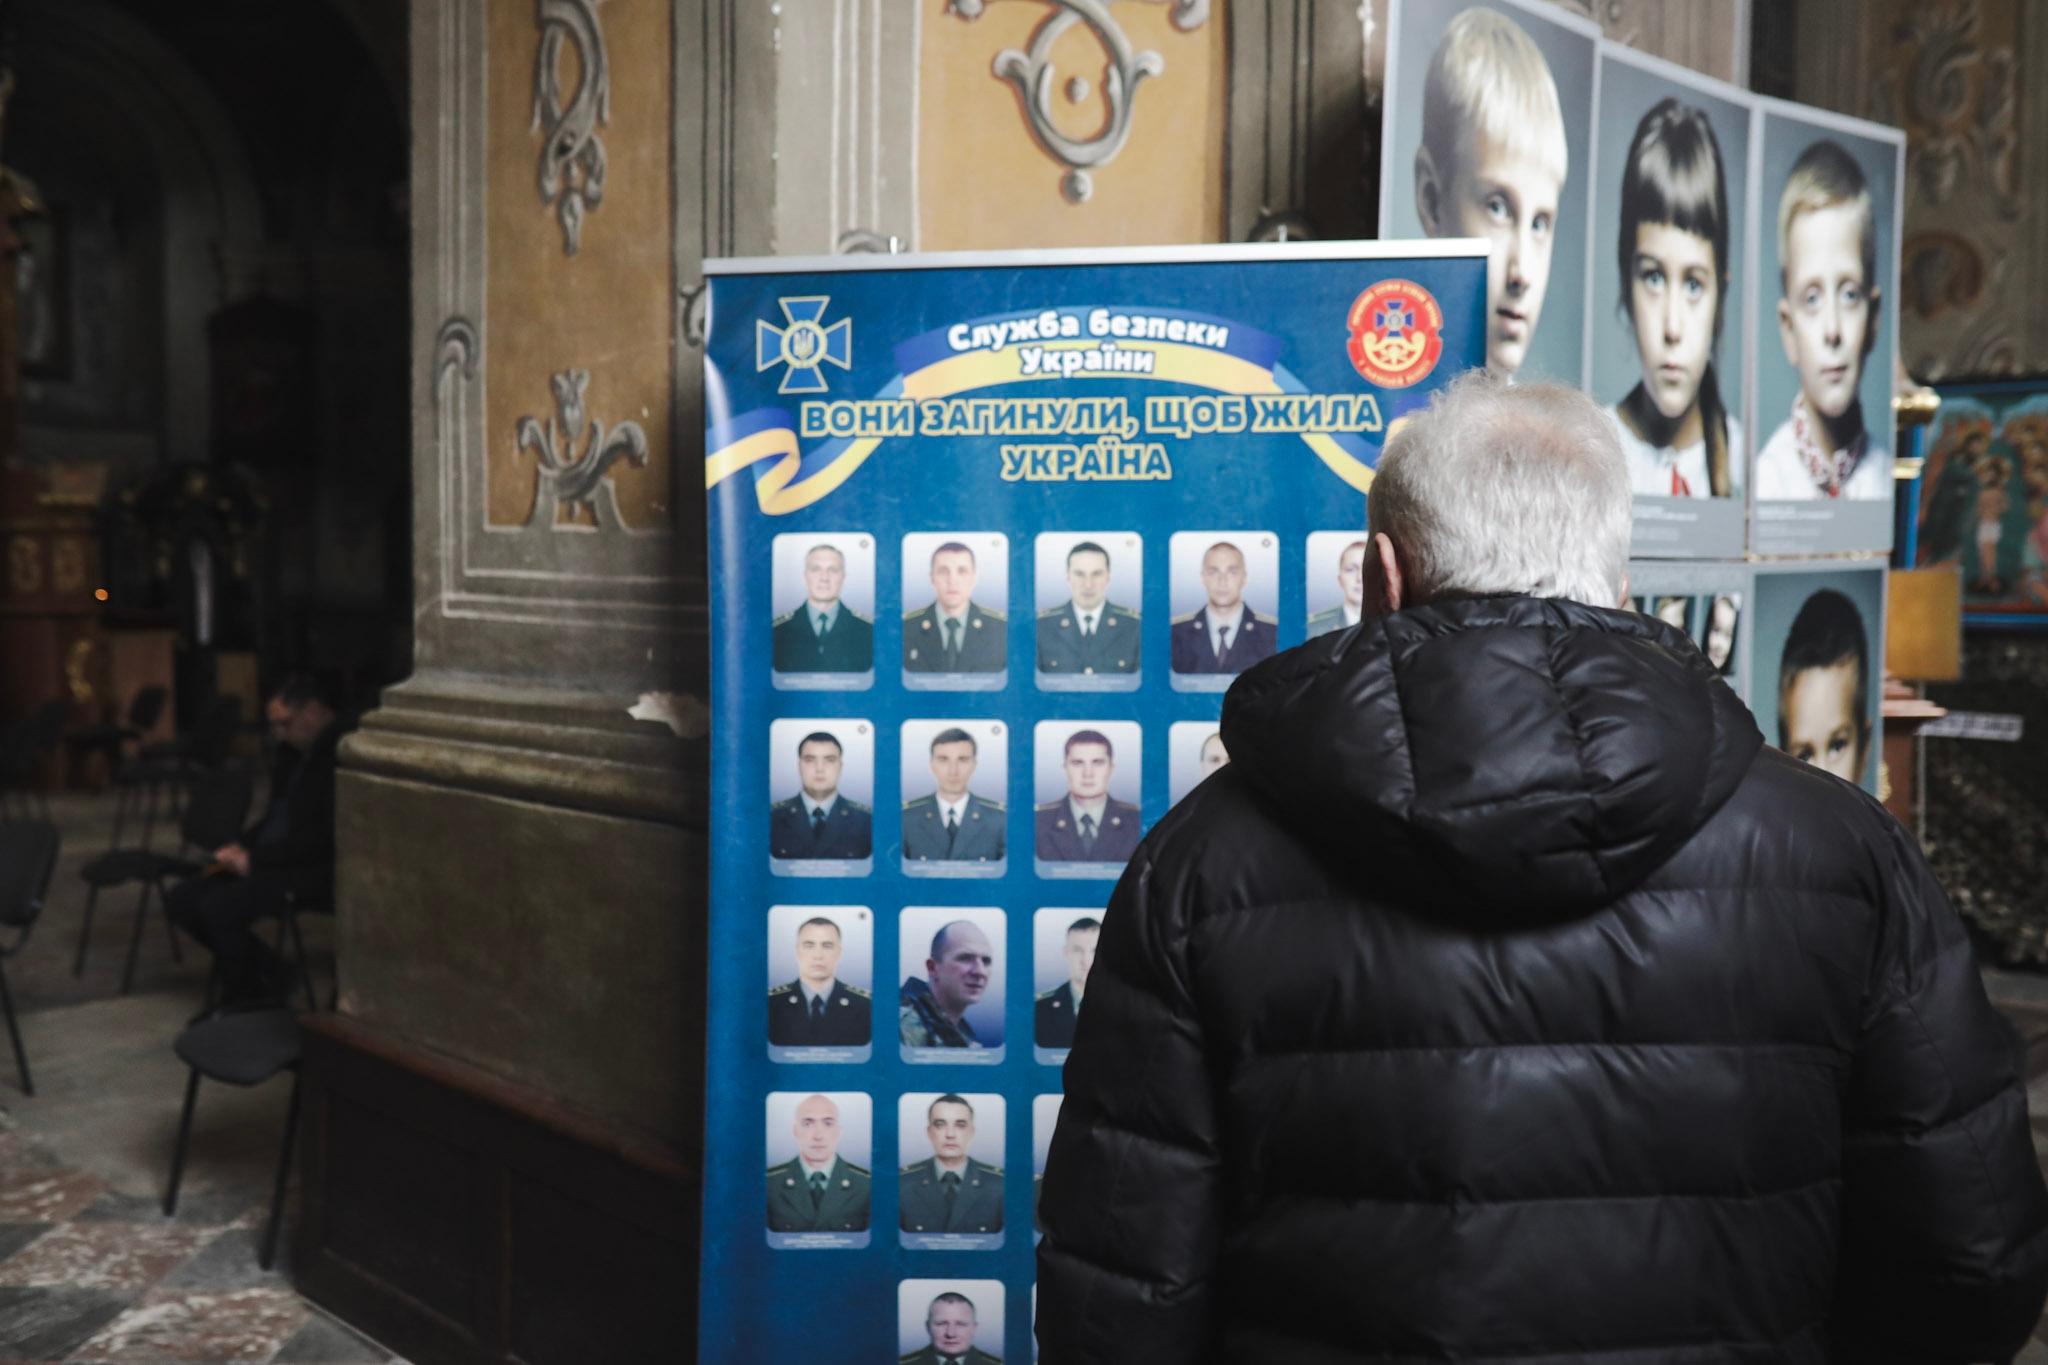 Anadolu/Getty - Easter gathering at Saints Peter and Paul Church in Lviv amid Russian attacks